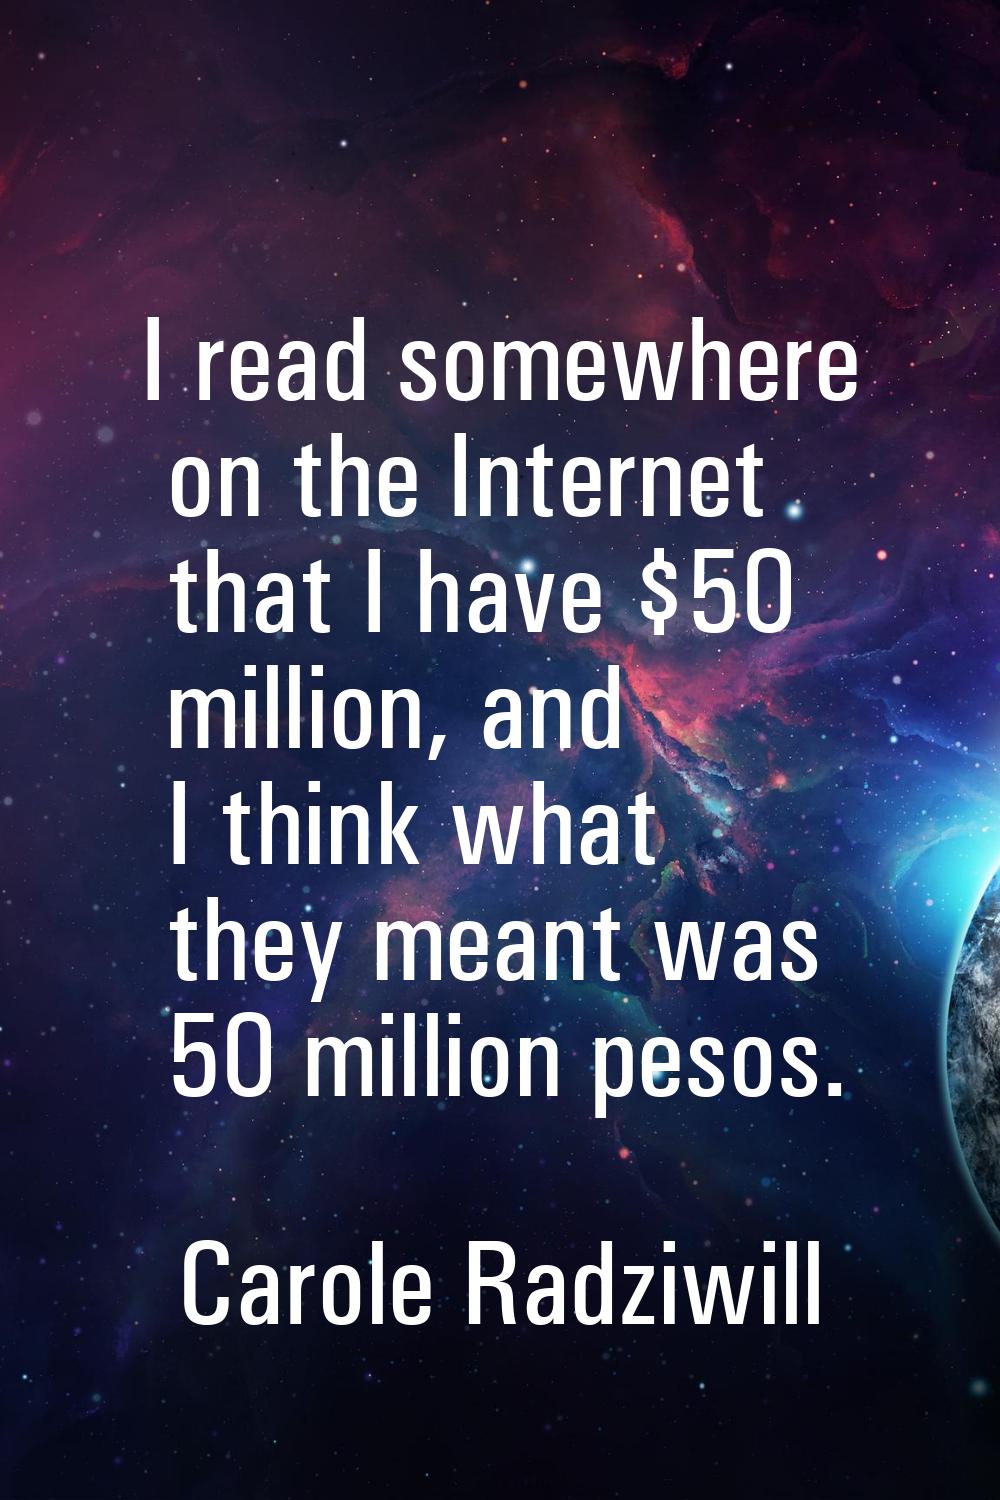 I read somewhere on the Internet that I have $50 million, and I think what they meant was 50 millio